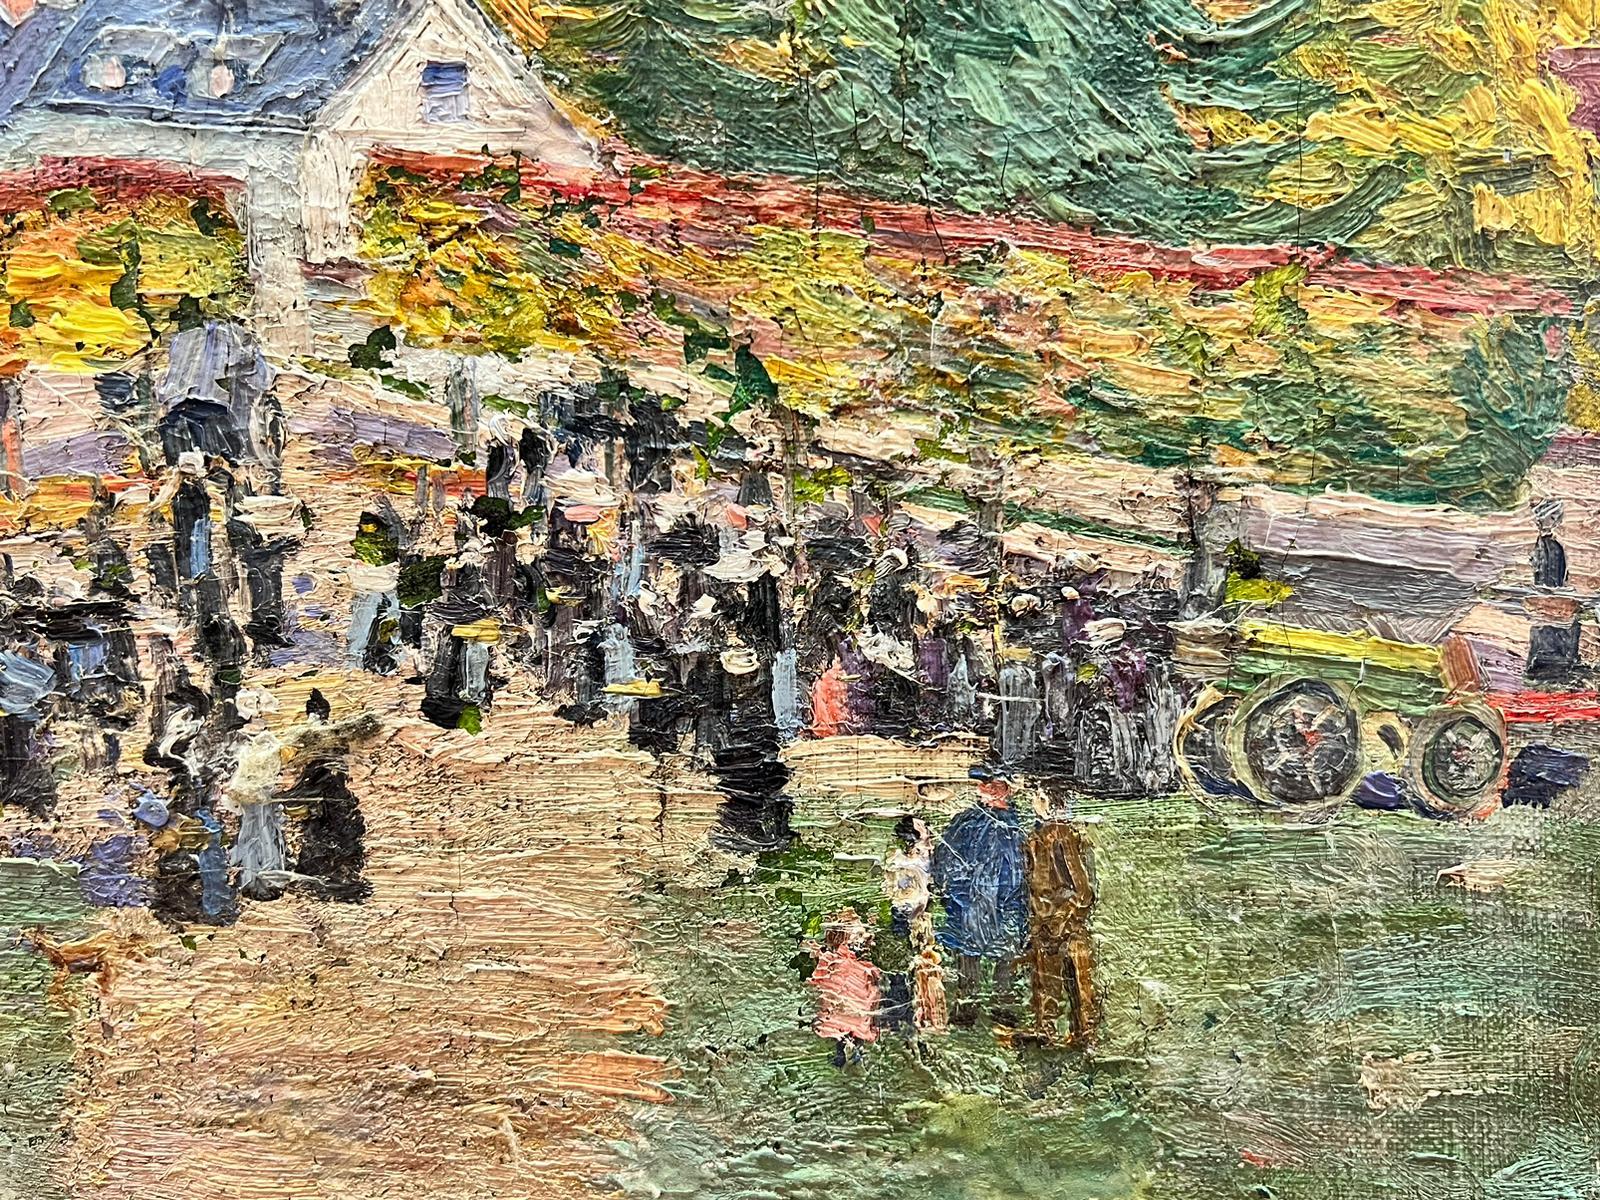 Artist/ School: Suzanne Crochet (French c. 1930) French Impressionist artist

Title: the Village Gathering

Medium: oil on stretched canvas on board, unframed 

board: 10 x 14 inches

Provenance: private collection, France

Condition: The painting